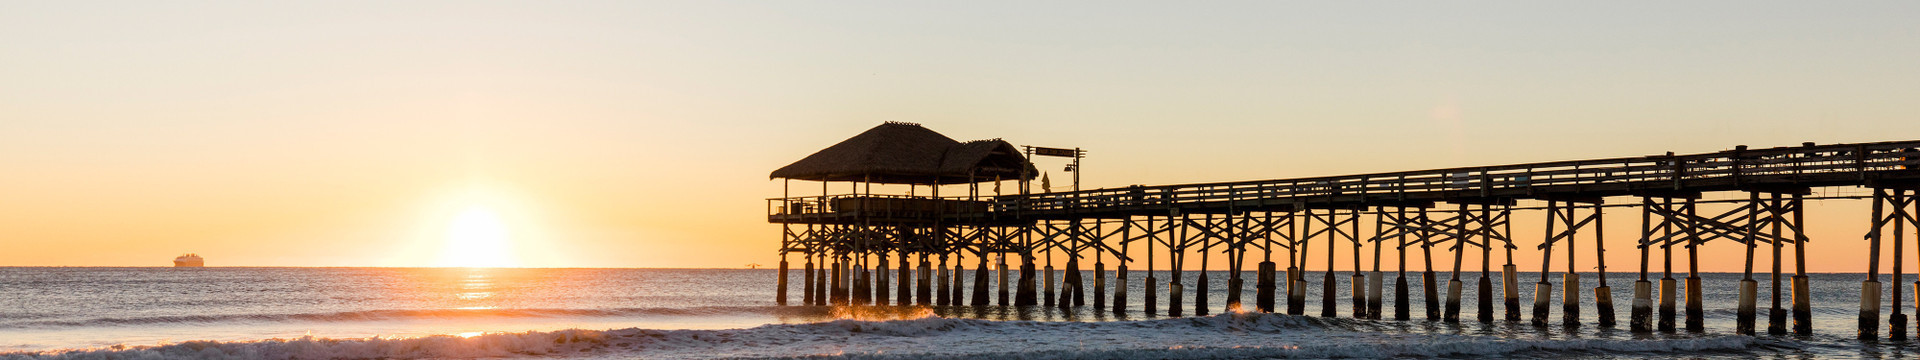 Westgate Travel Club | Beach Pier in front of the sunset